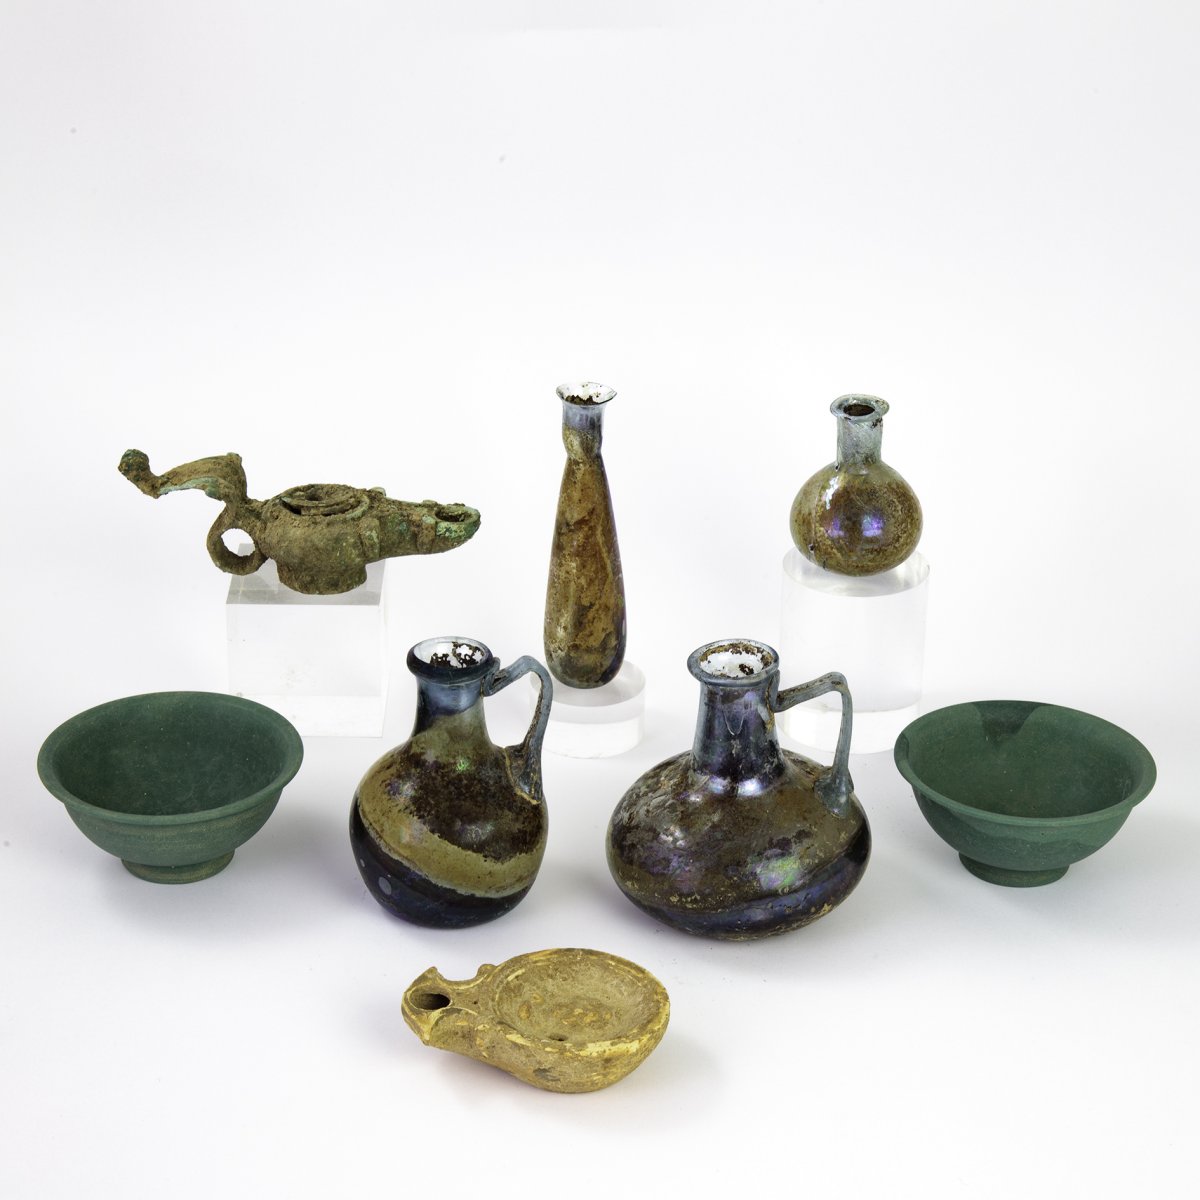 Roman glass vessels and lamps from France